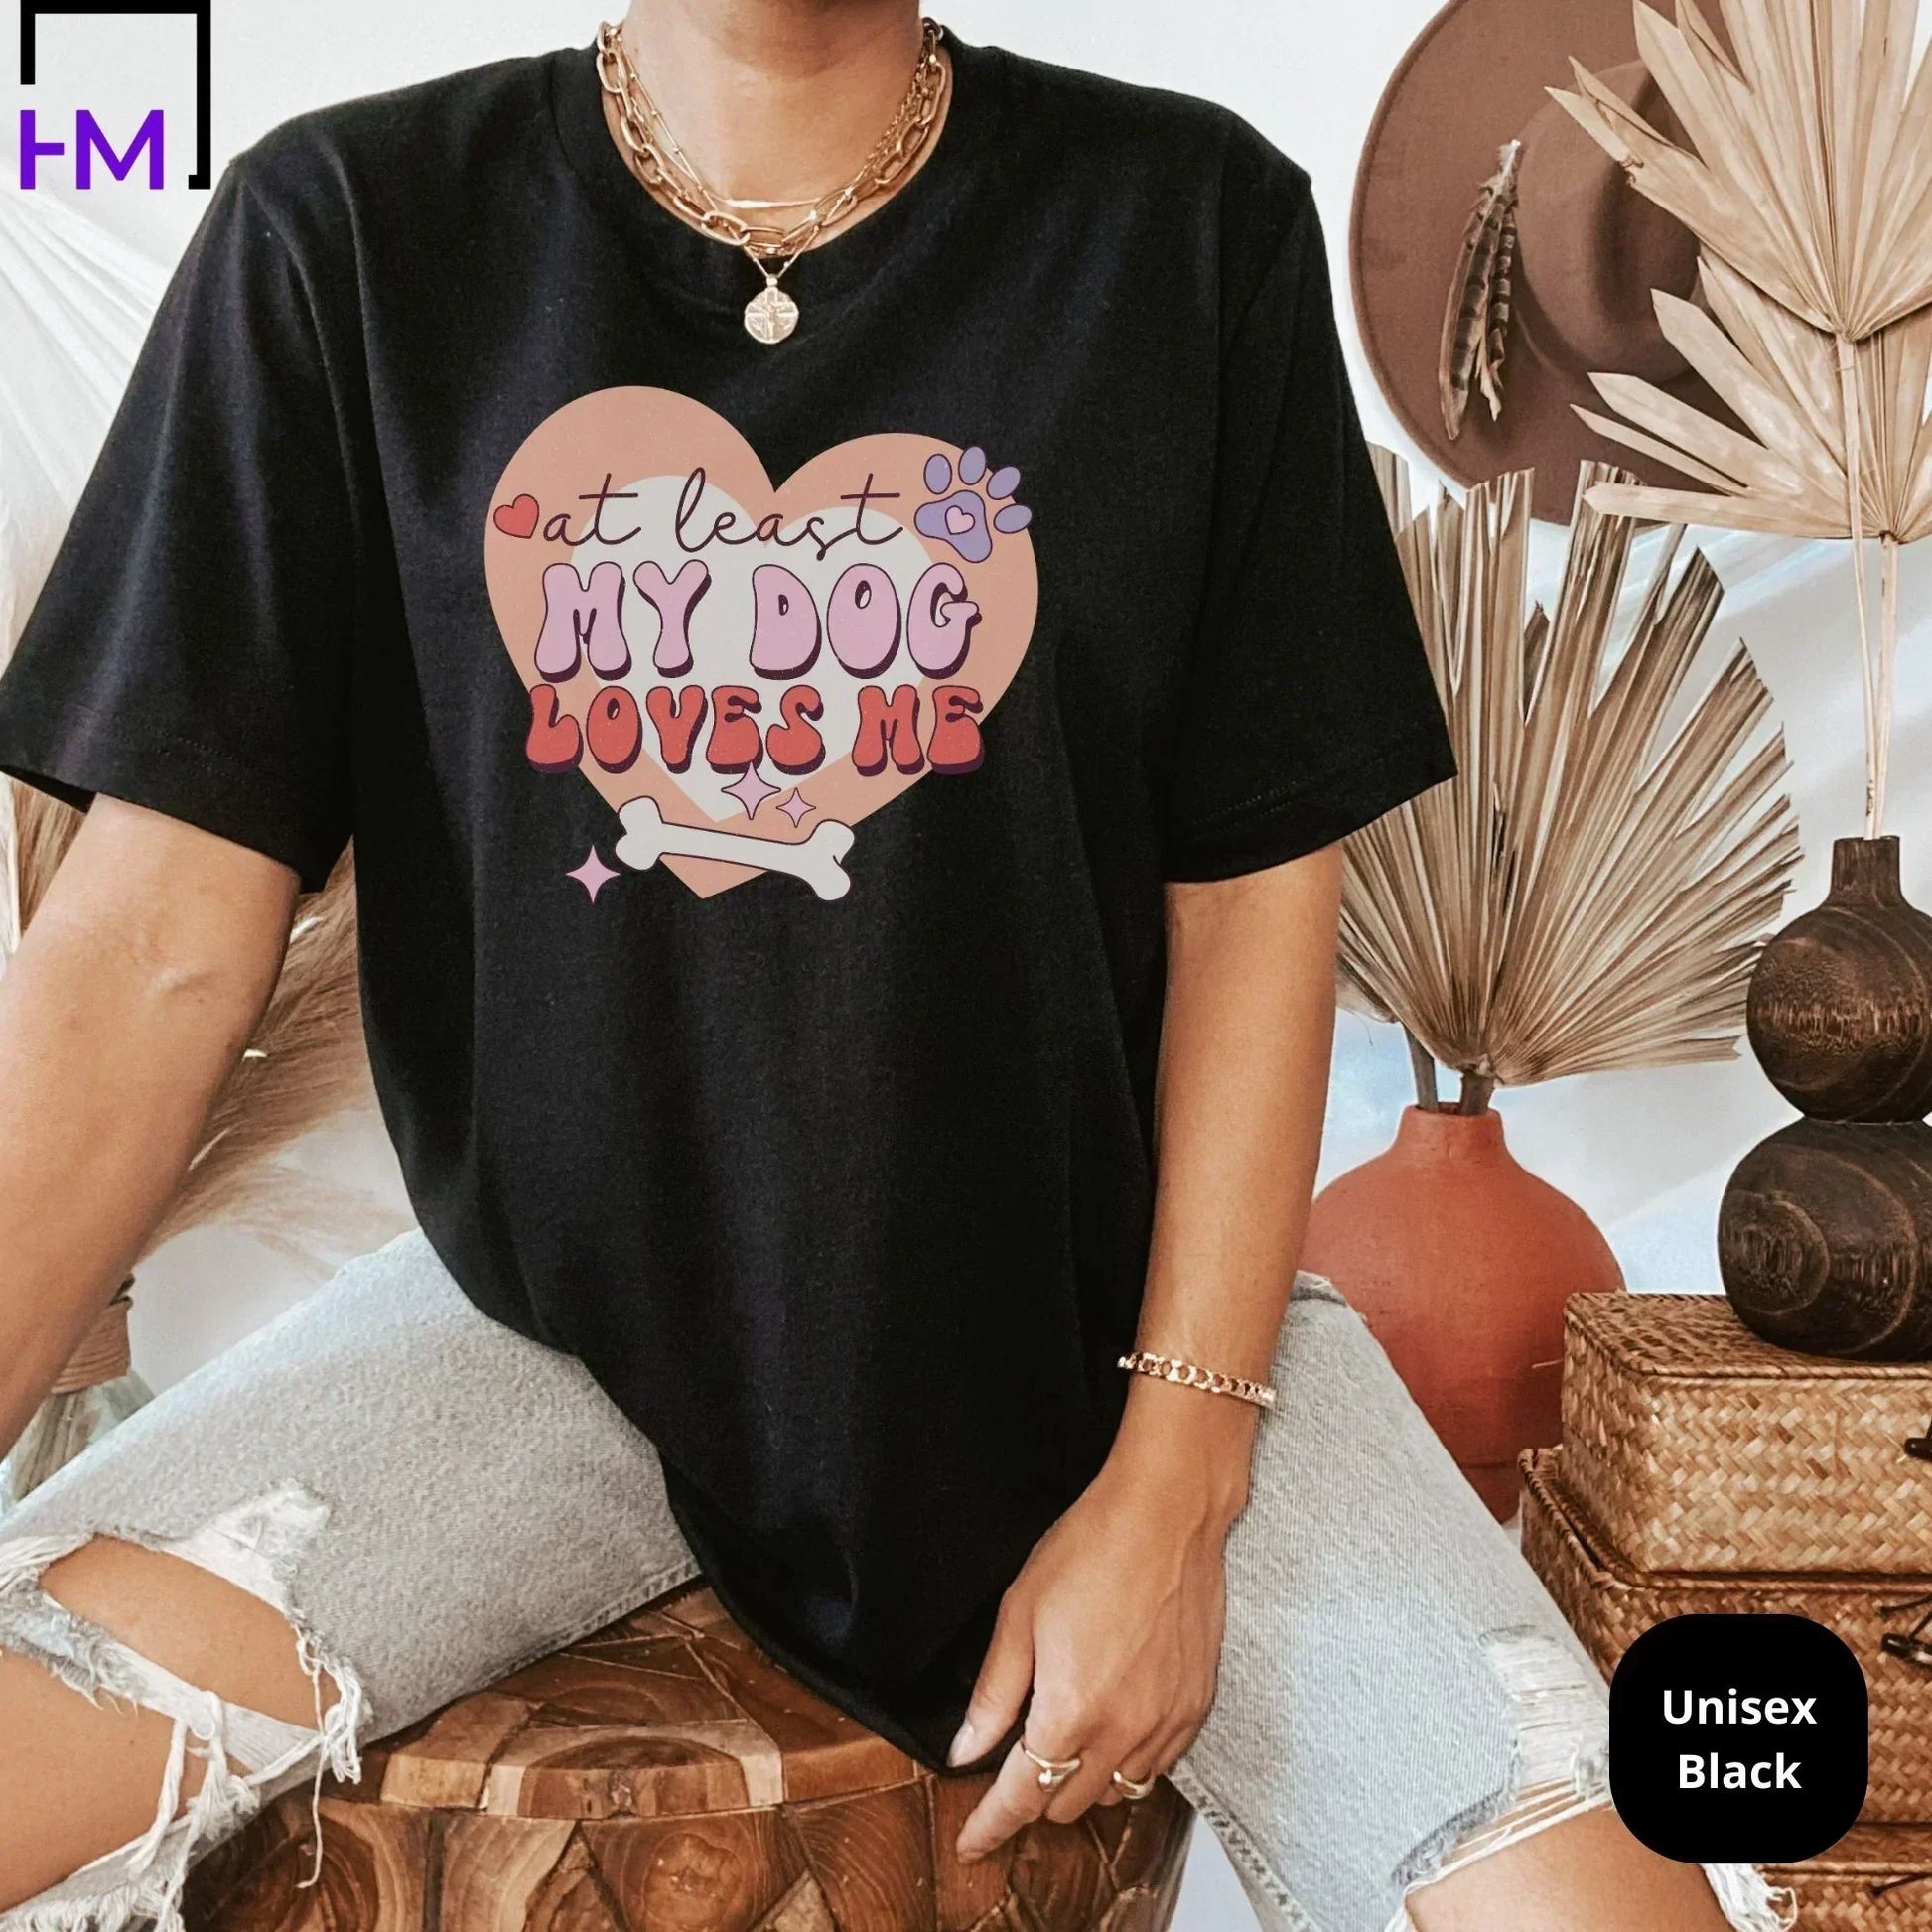 At Least My Dog Loves Me, Funny Valentine's Day Shirt, Bestie Valentine's Gift for Her, Love Shirts for Women, Cute V-Day Shirt, Proud to Be Single, Self Love Shirt HMDesignStudioUS